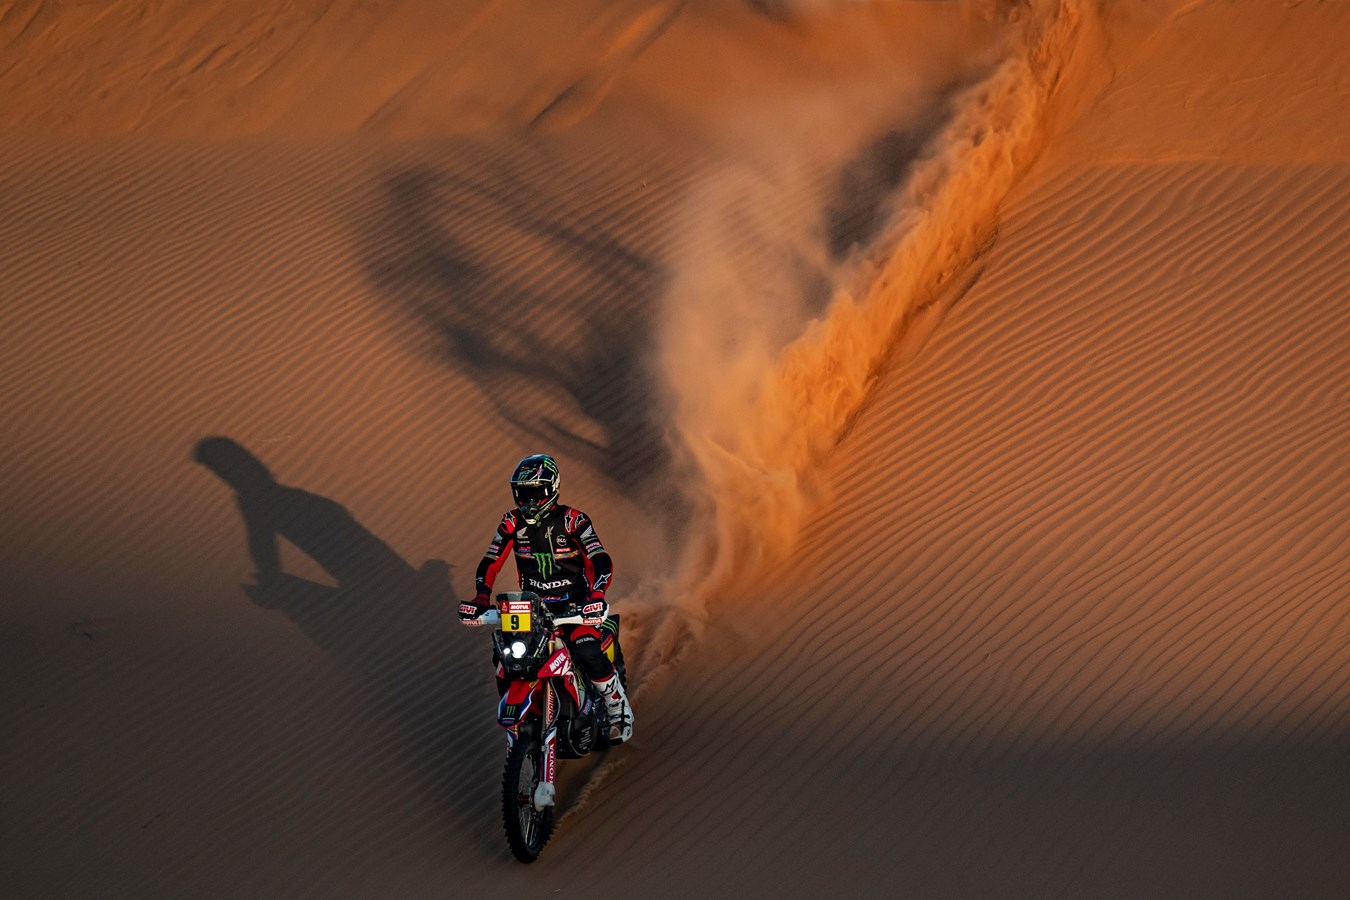 Ricky Brabec and Honda claim the final victory at the 2020 Dakar Rally